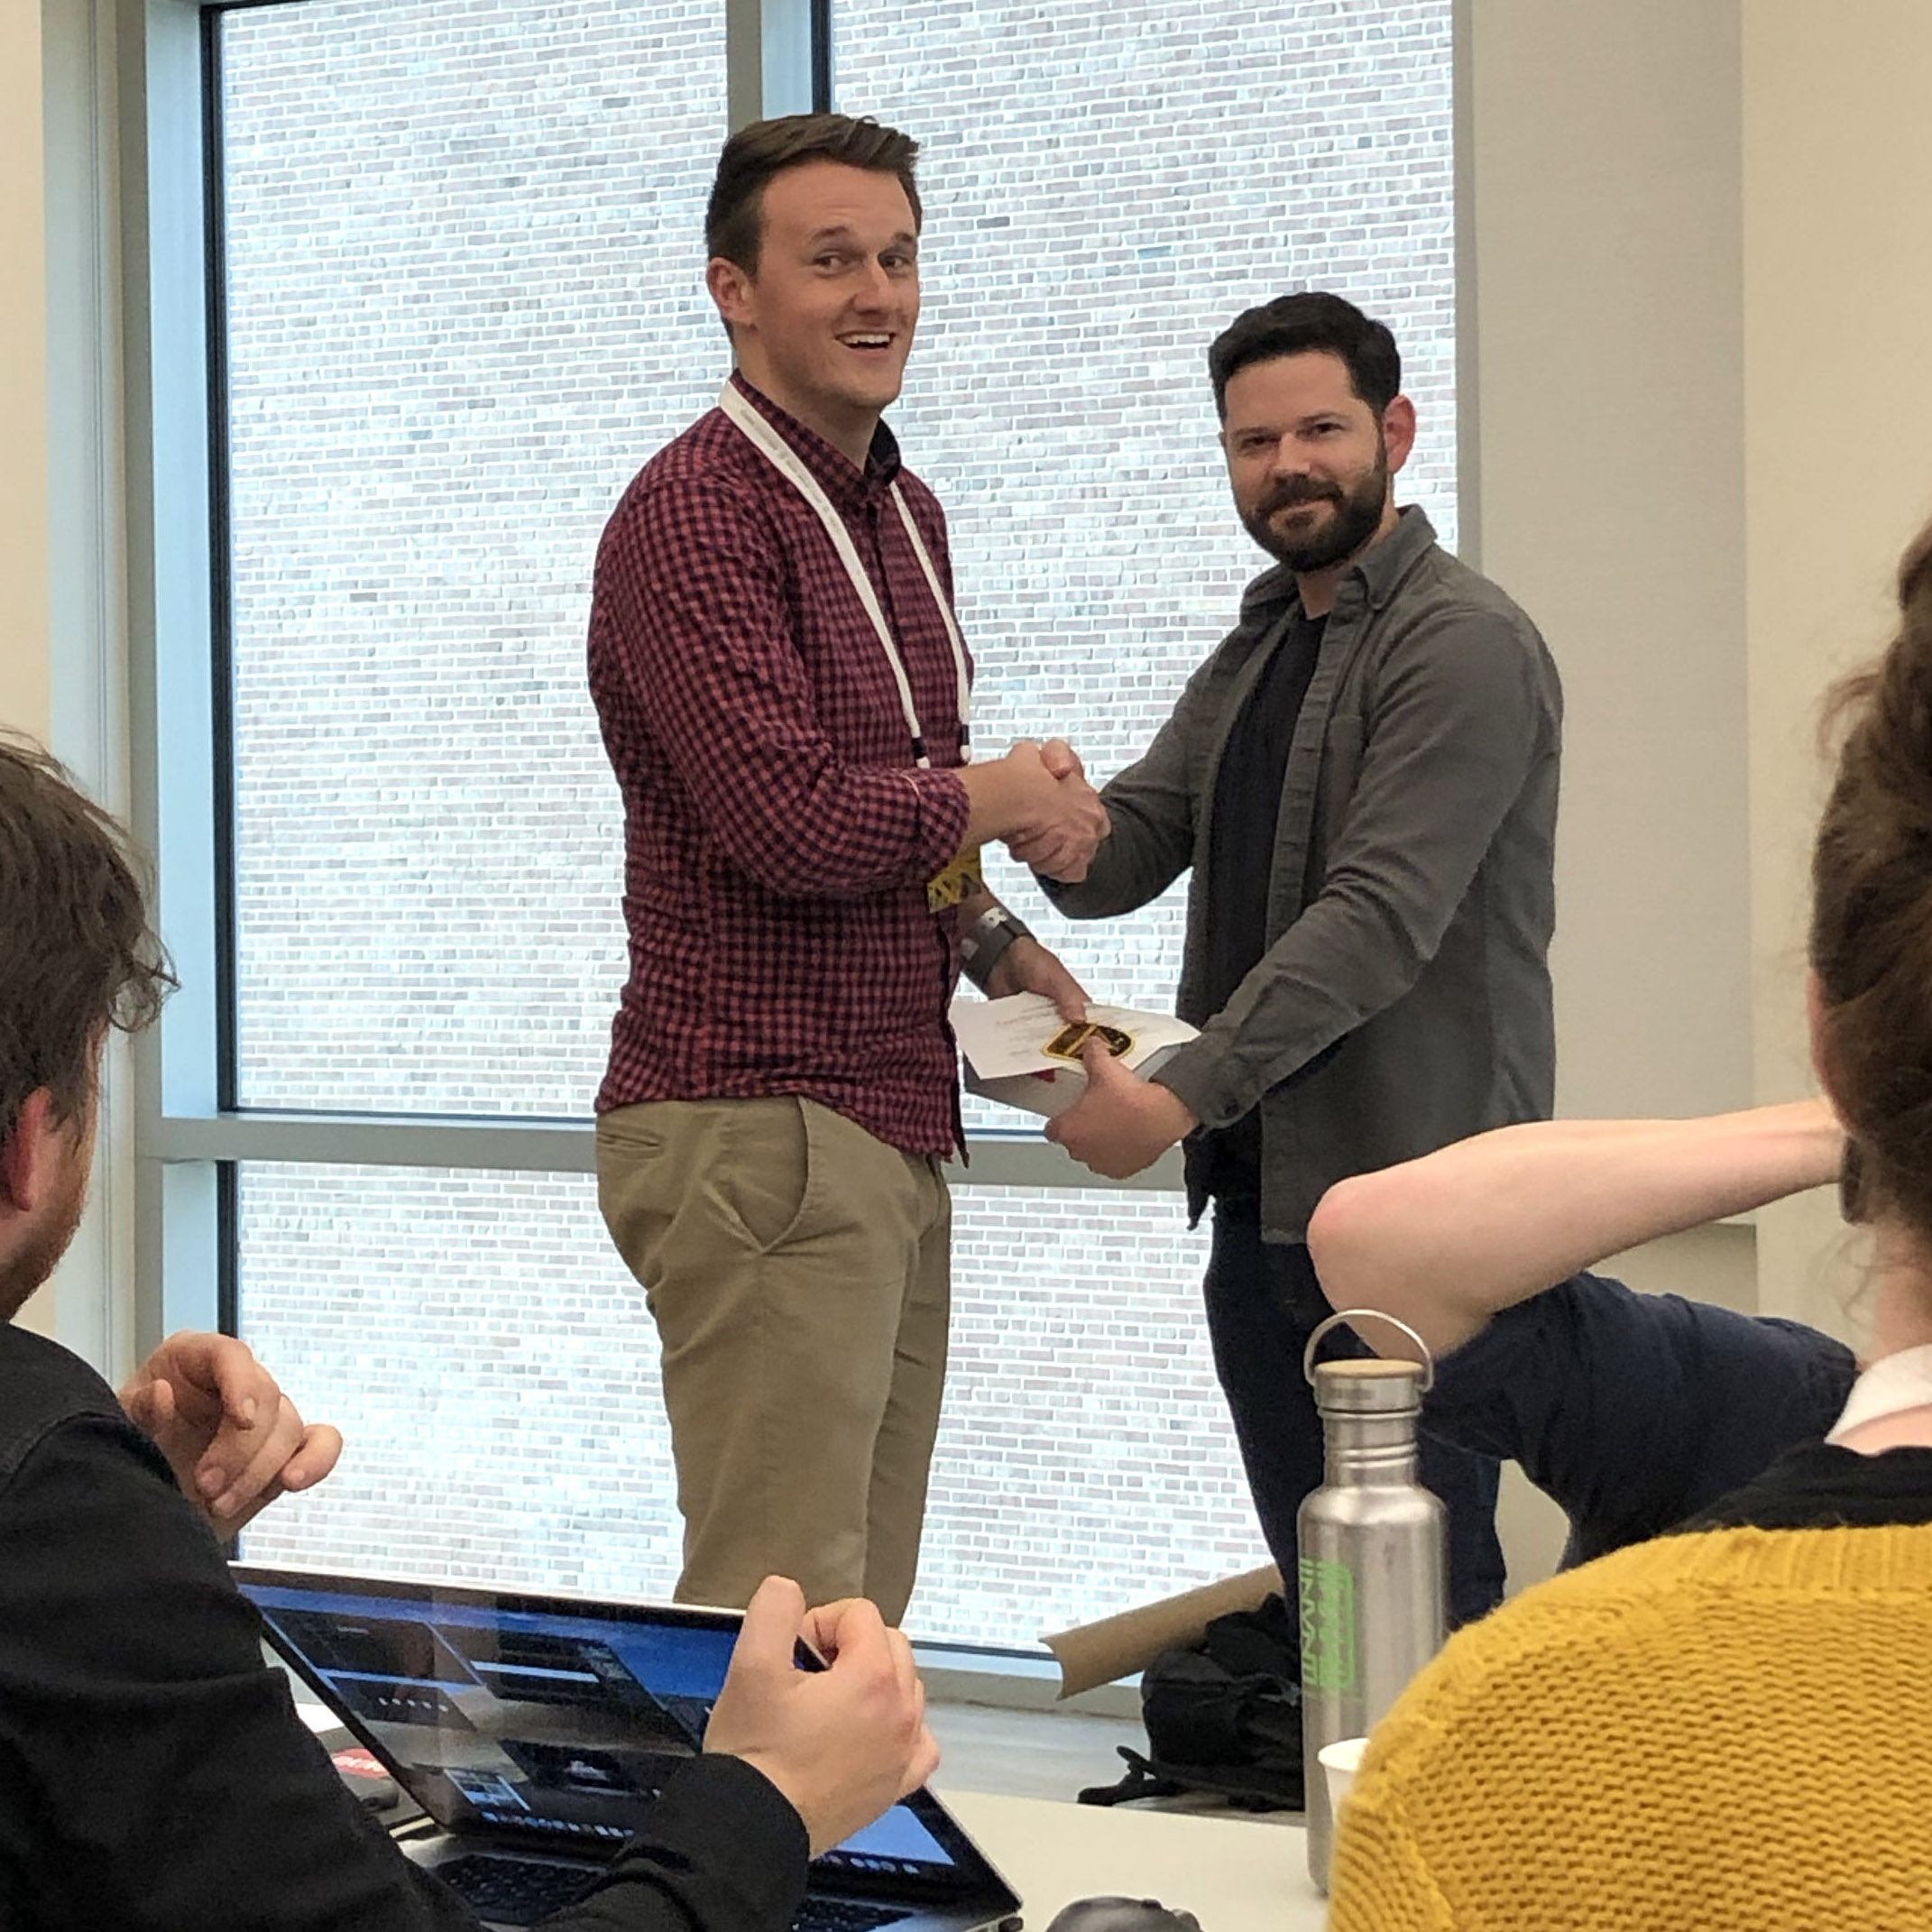 Austin and Nathan shaking hands at a playful, low-key course completion ceremony